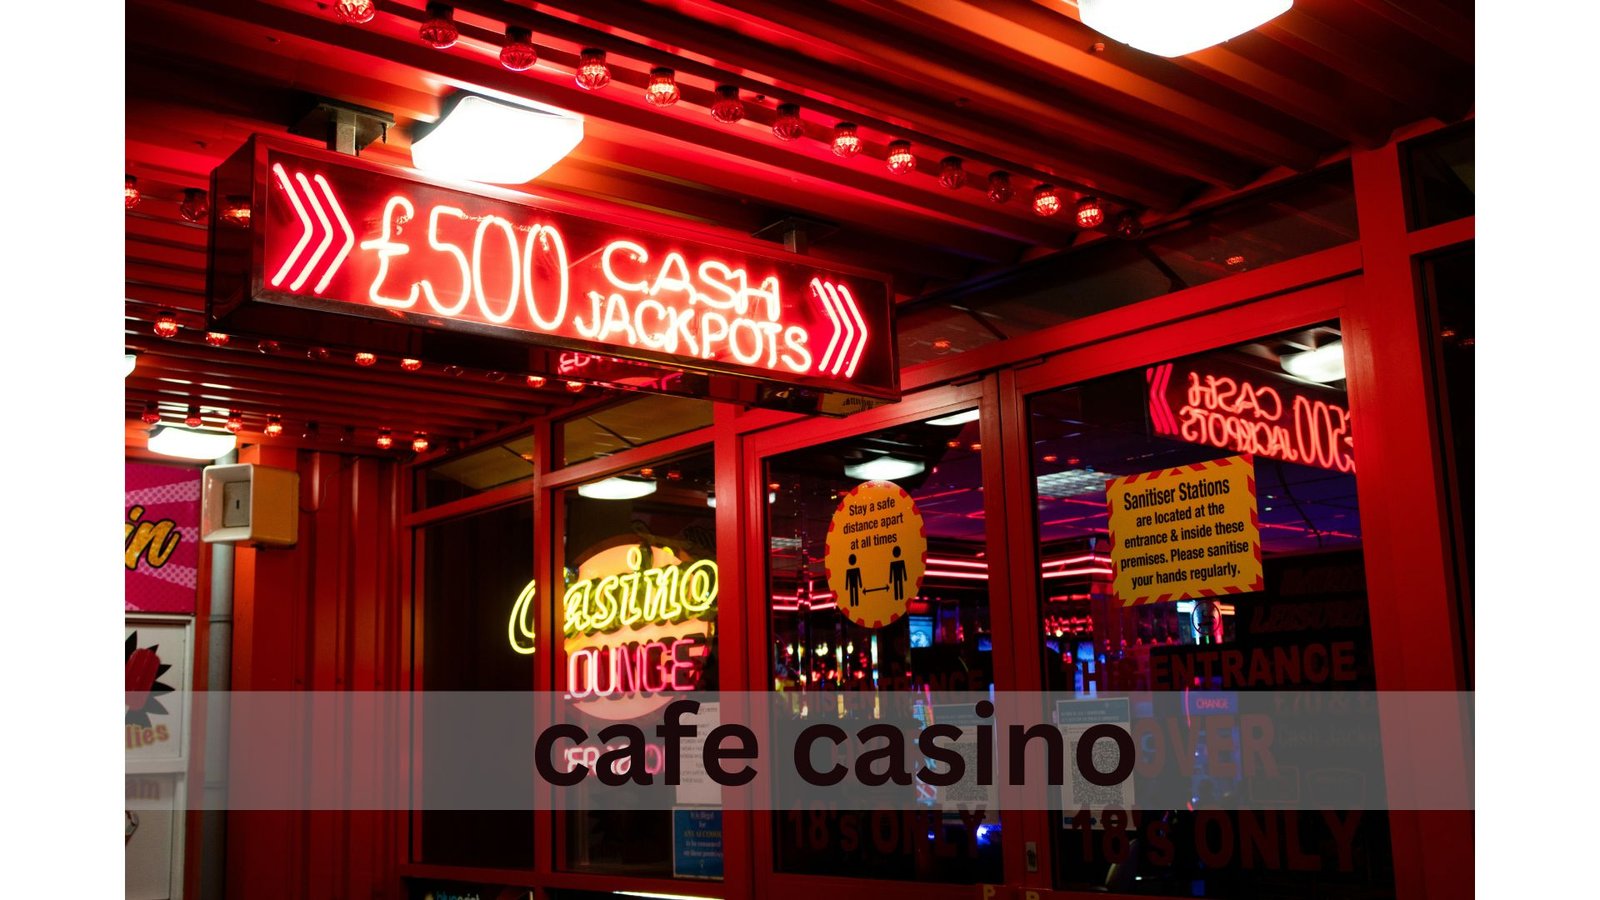 Get Started with Cafe Casino Grab Your $2500 Welcome Bonus Today!